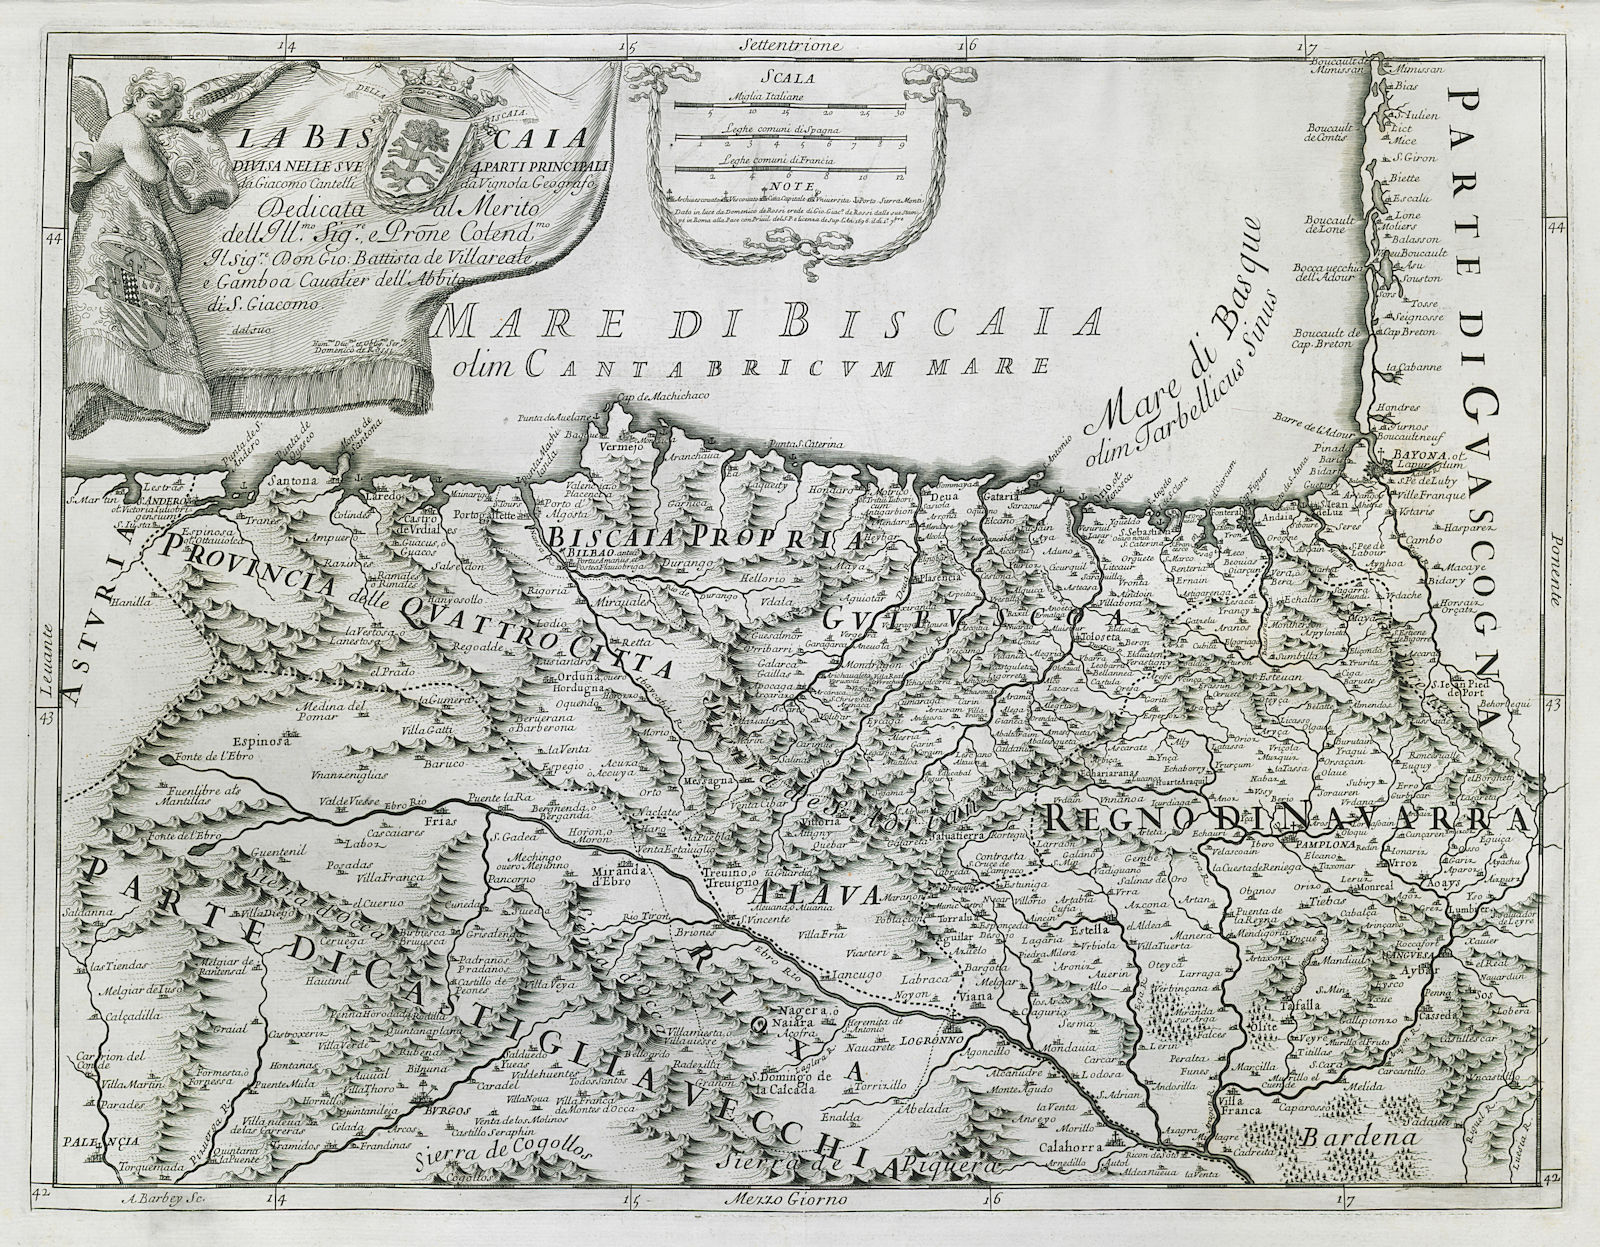 Associate Product La Biscaia. Biscay / Vizcaya. Spanish Basque country. ROSSI / CANTELLI 1696 map